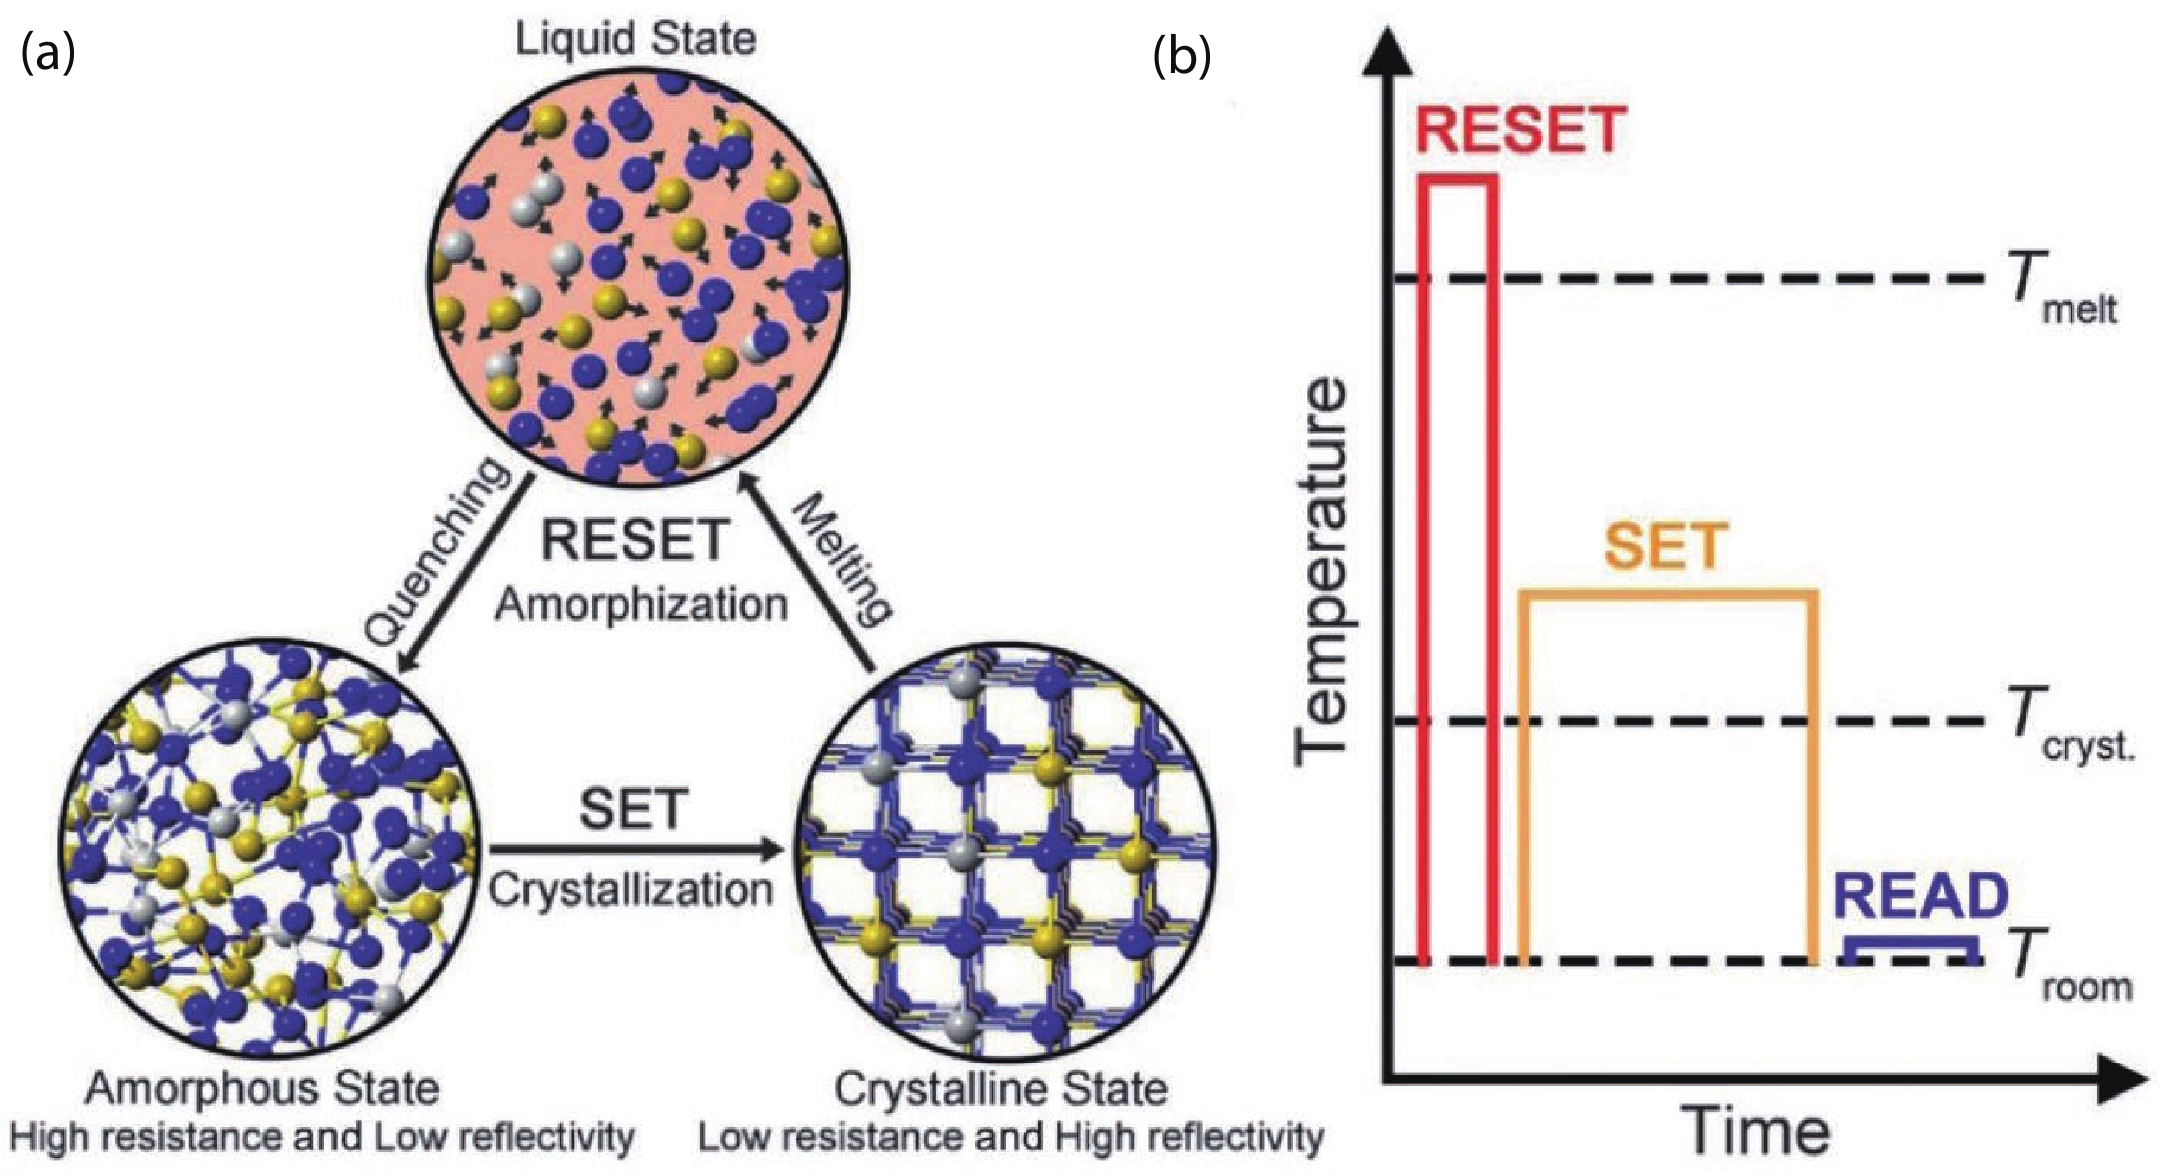 (Color online) (a) Stable phase states and the atomistic structures. (b) The phase change dynamics with RESET/SET/READ pulses. Reprinted by permission from Springer Nature Customer Service Centre GmbH: Springer Nature MRS Bulletin, Phase-change materials in electronics and photonics, Wei Zhang et al.[32], 2019.